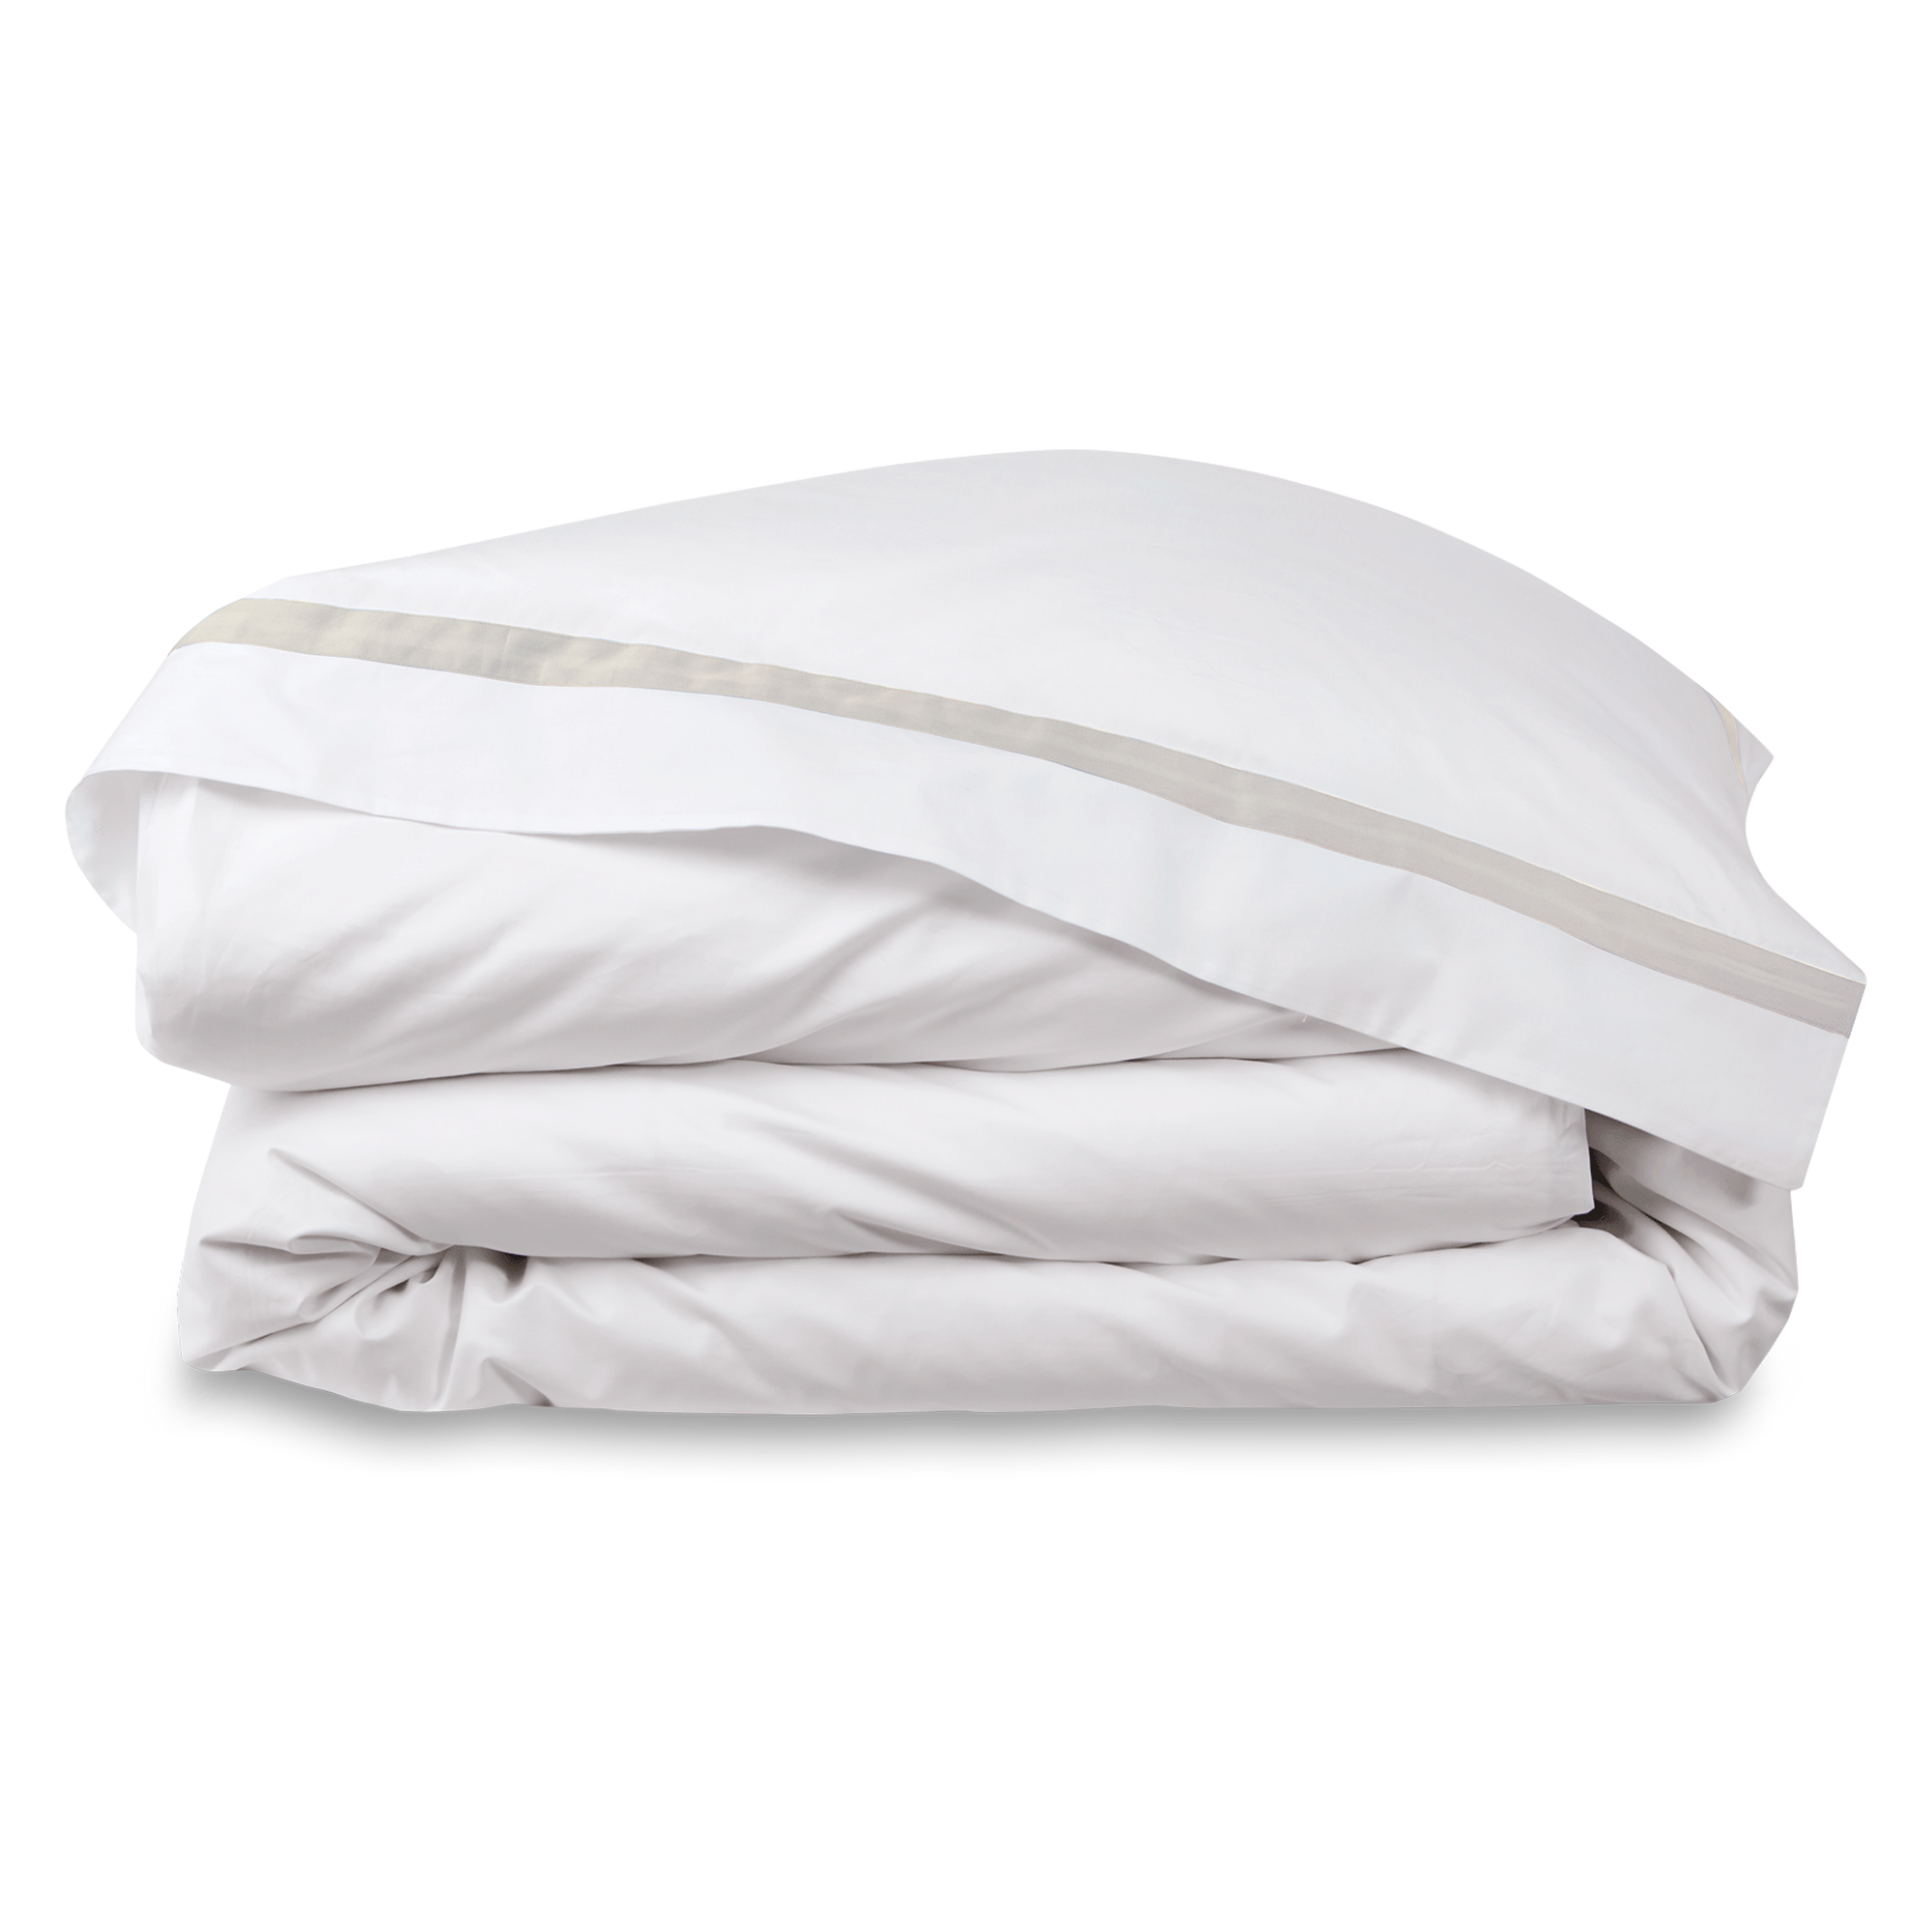 Produced in Italy exclusively for Elte, the Luna Collection features crisp and elegant white percale adorned with a 1